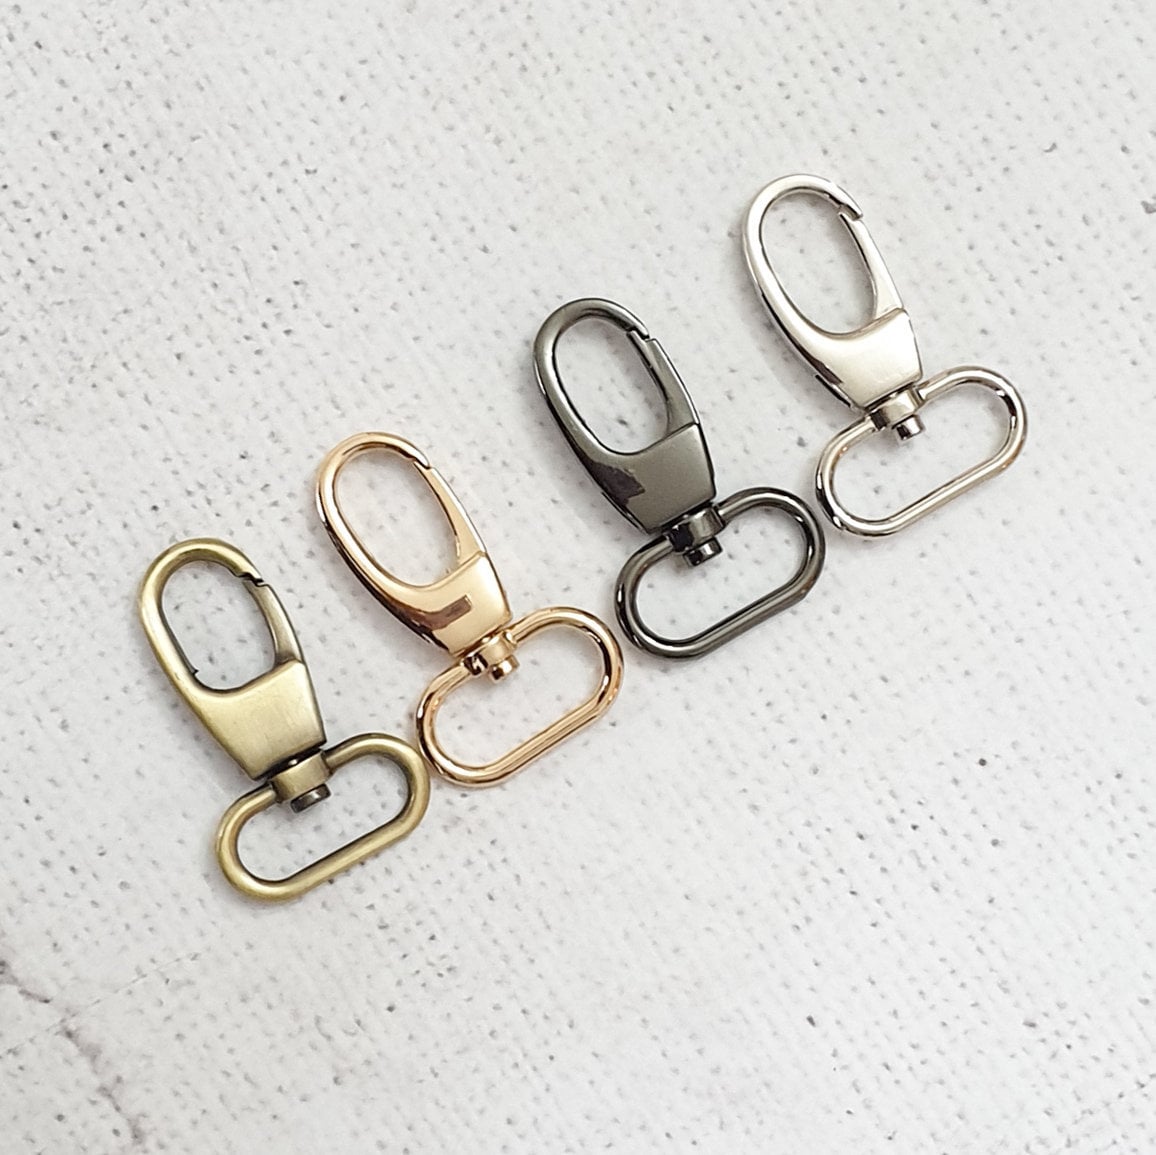 D Rings and Swivel Hooks in Black Rose Gold Gold Silver 